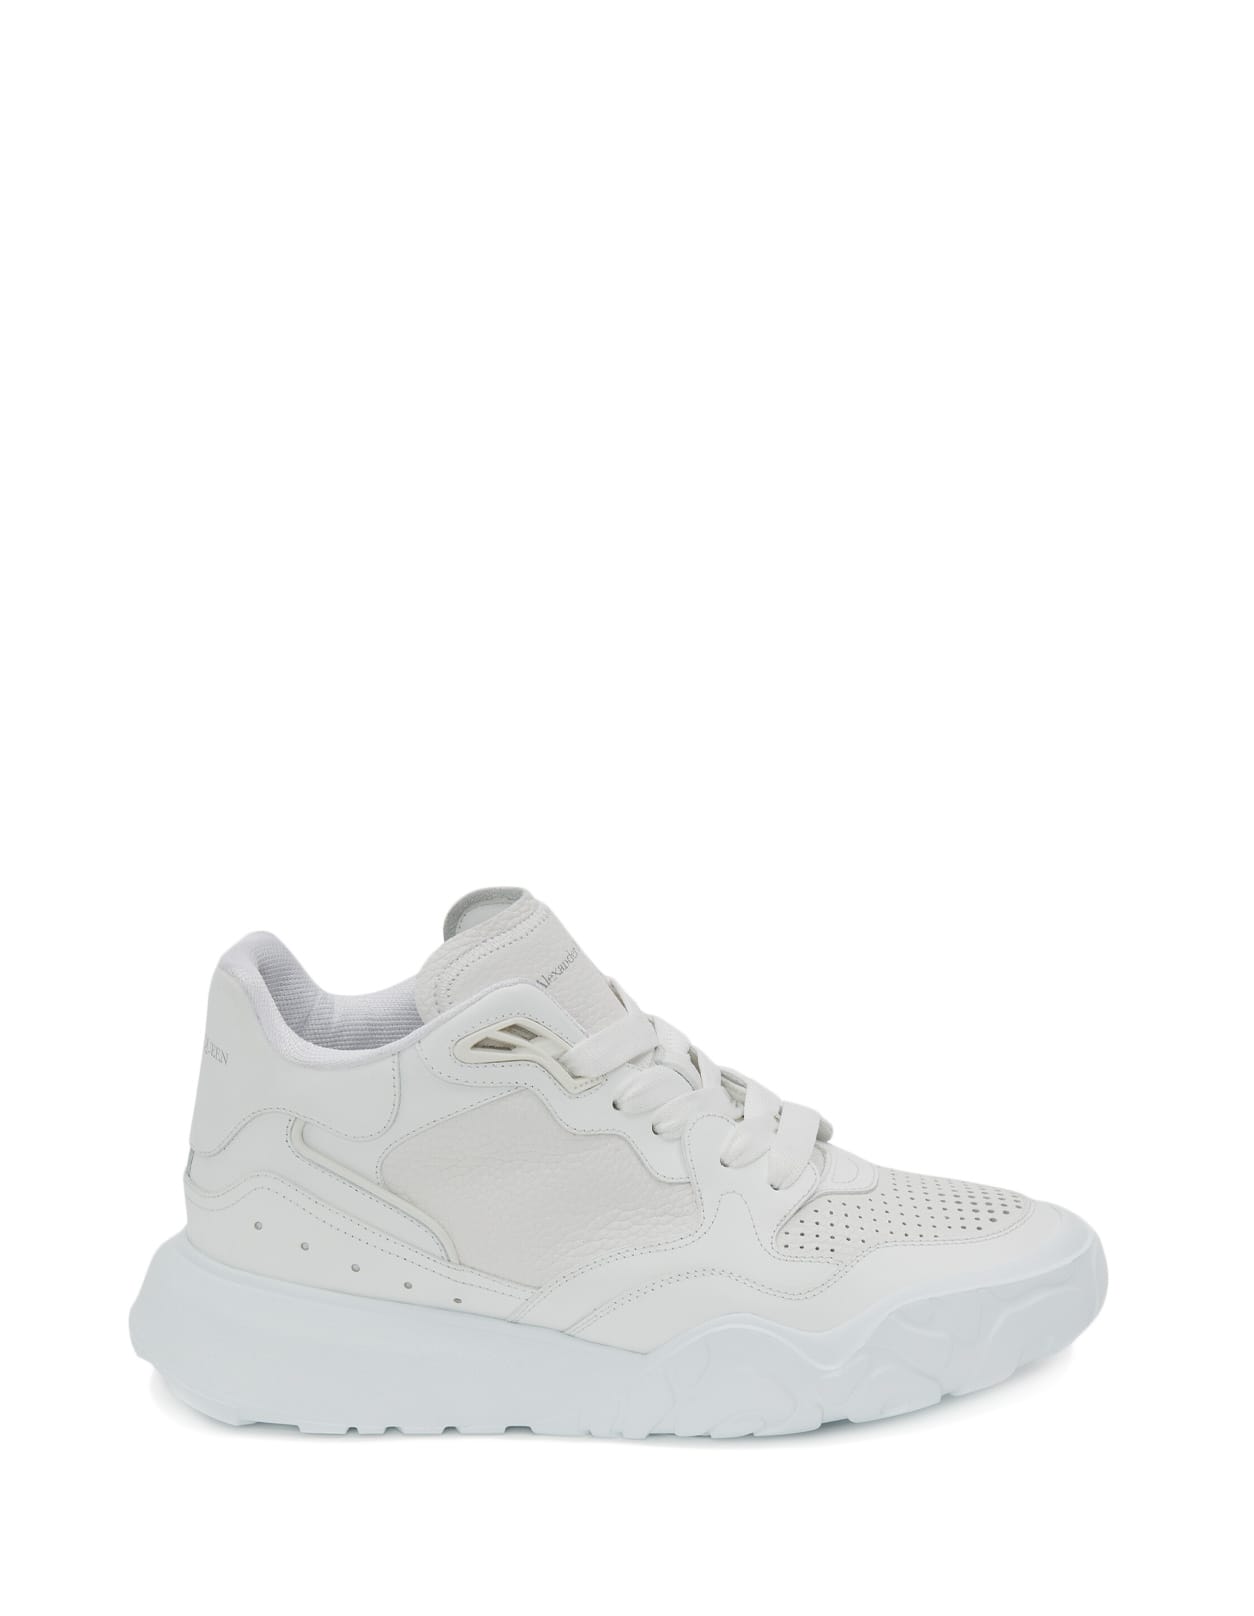 ALEXANDER MCQUEEN MAN WHITE AND SILVER COURT SNEAKERS